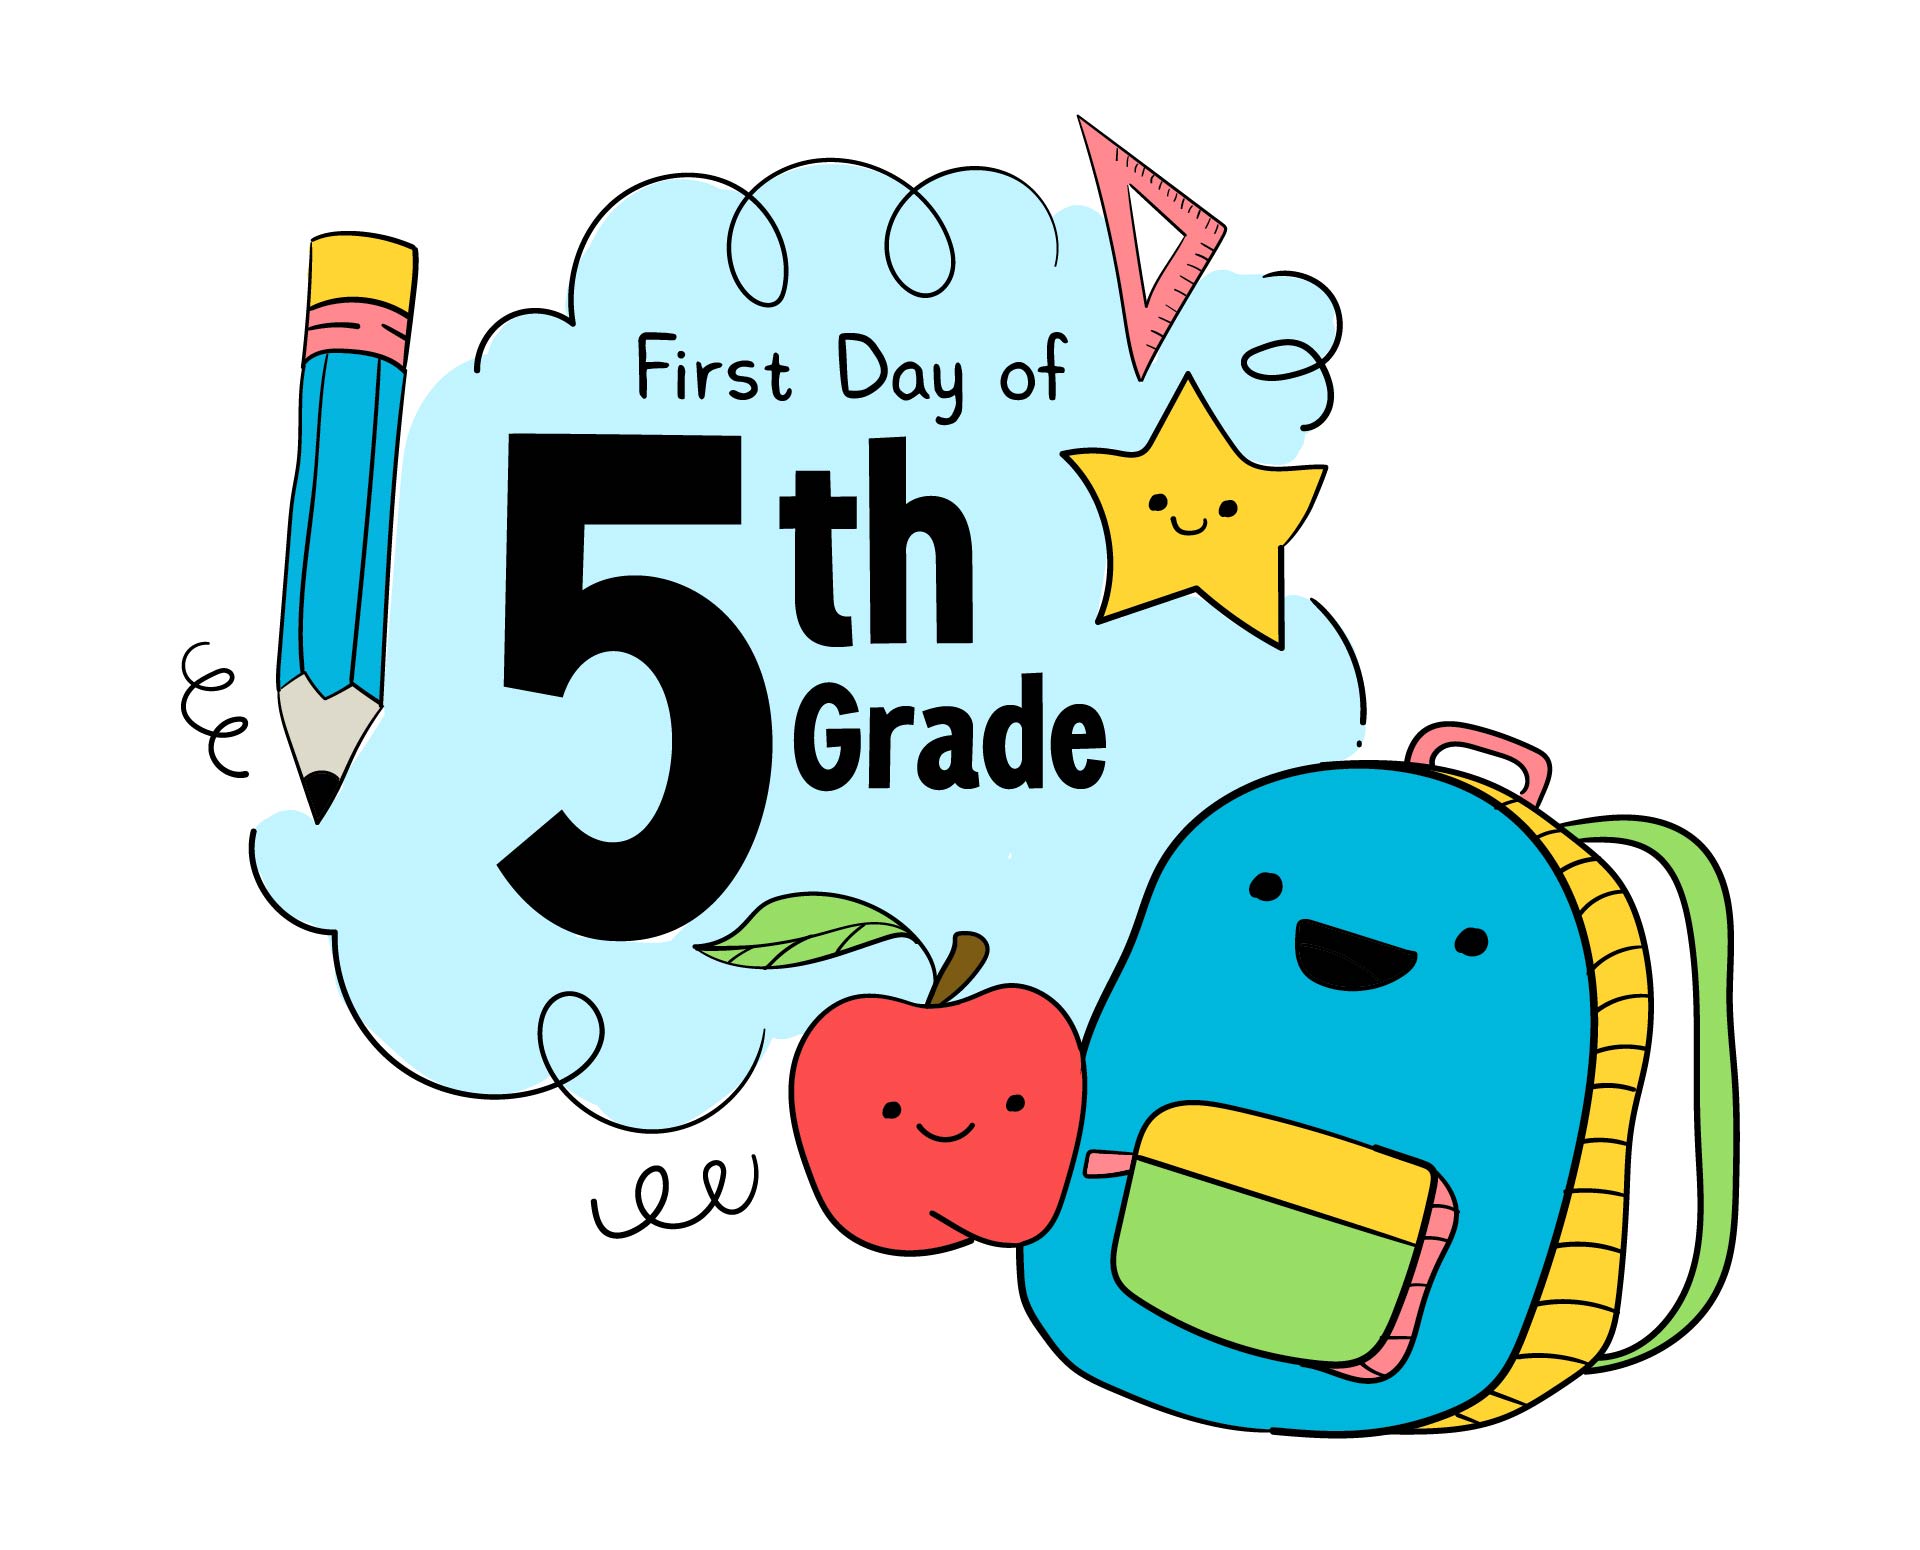 First Day of School 5th Grade Sign